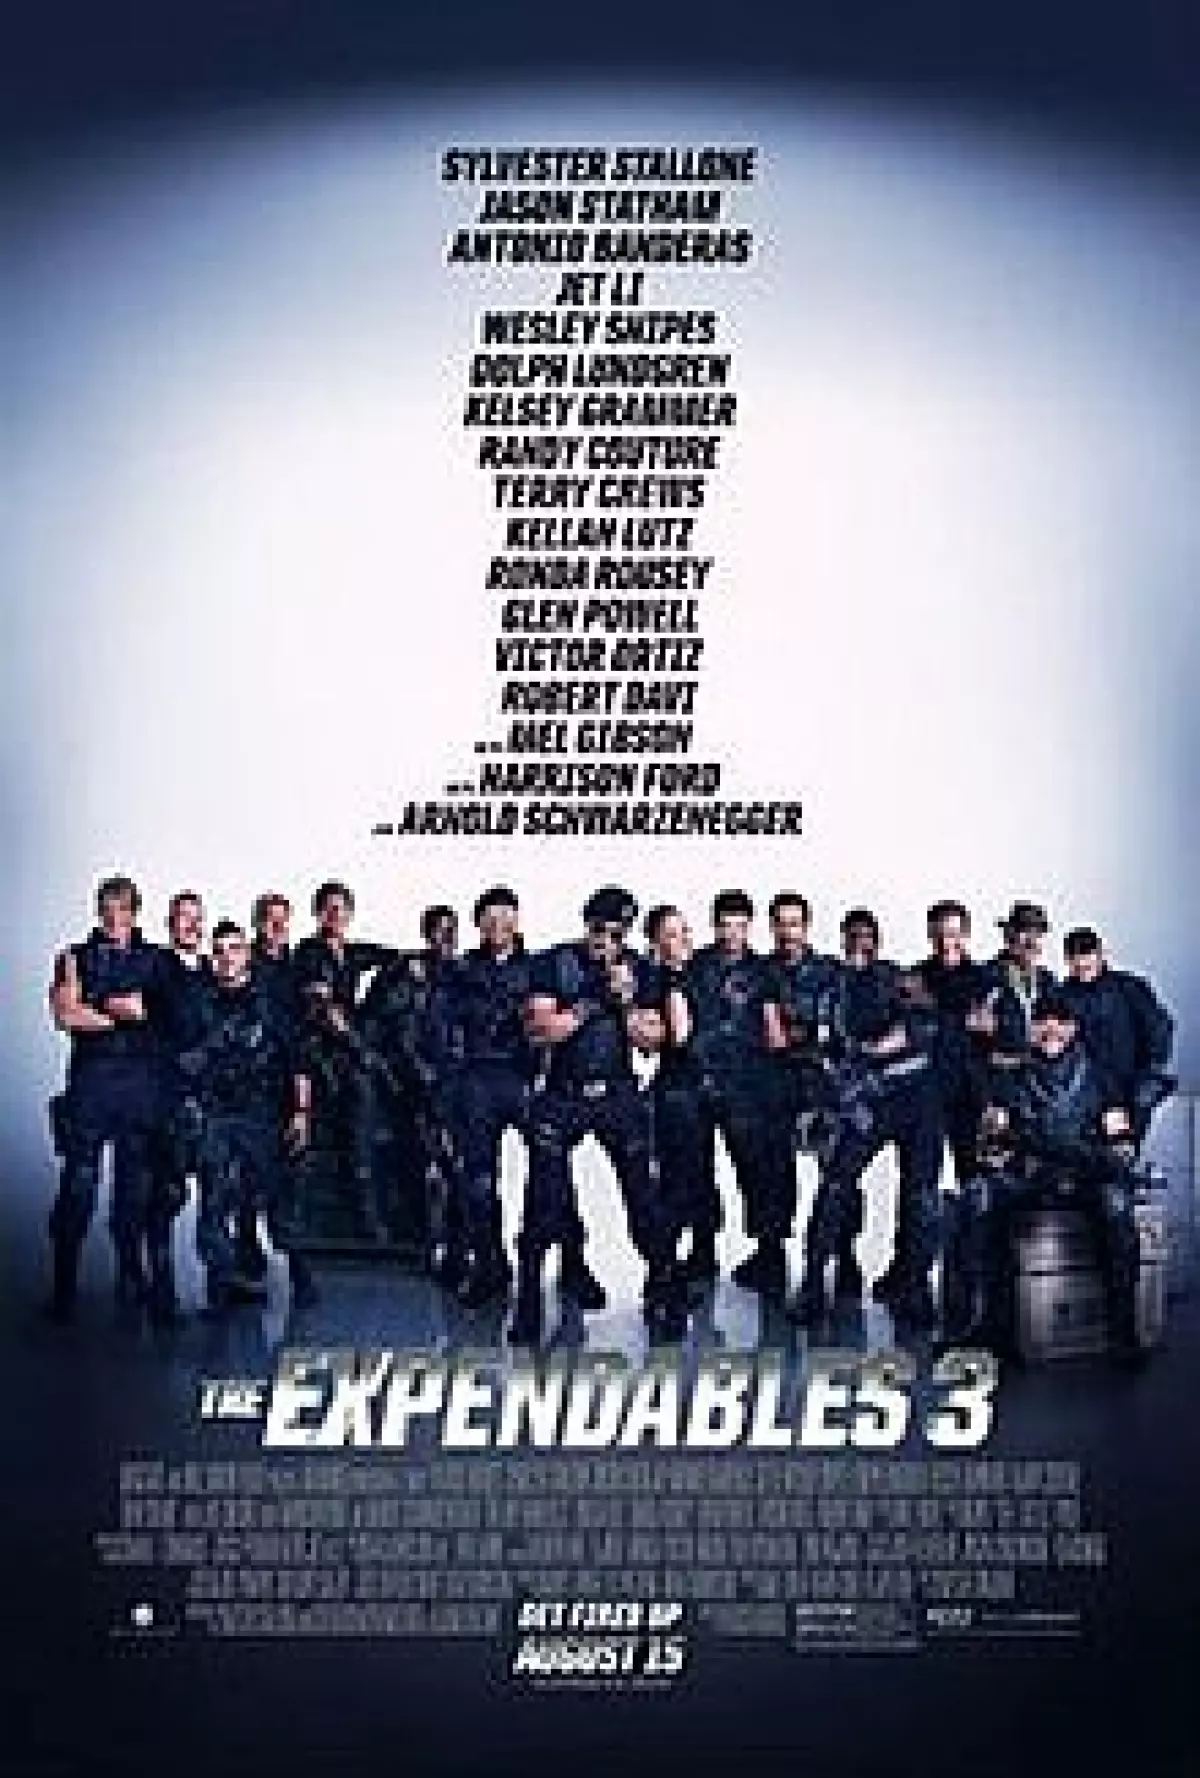 The cast of The Expendables 3